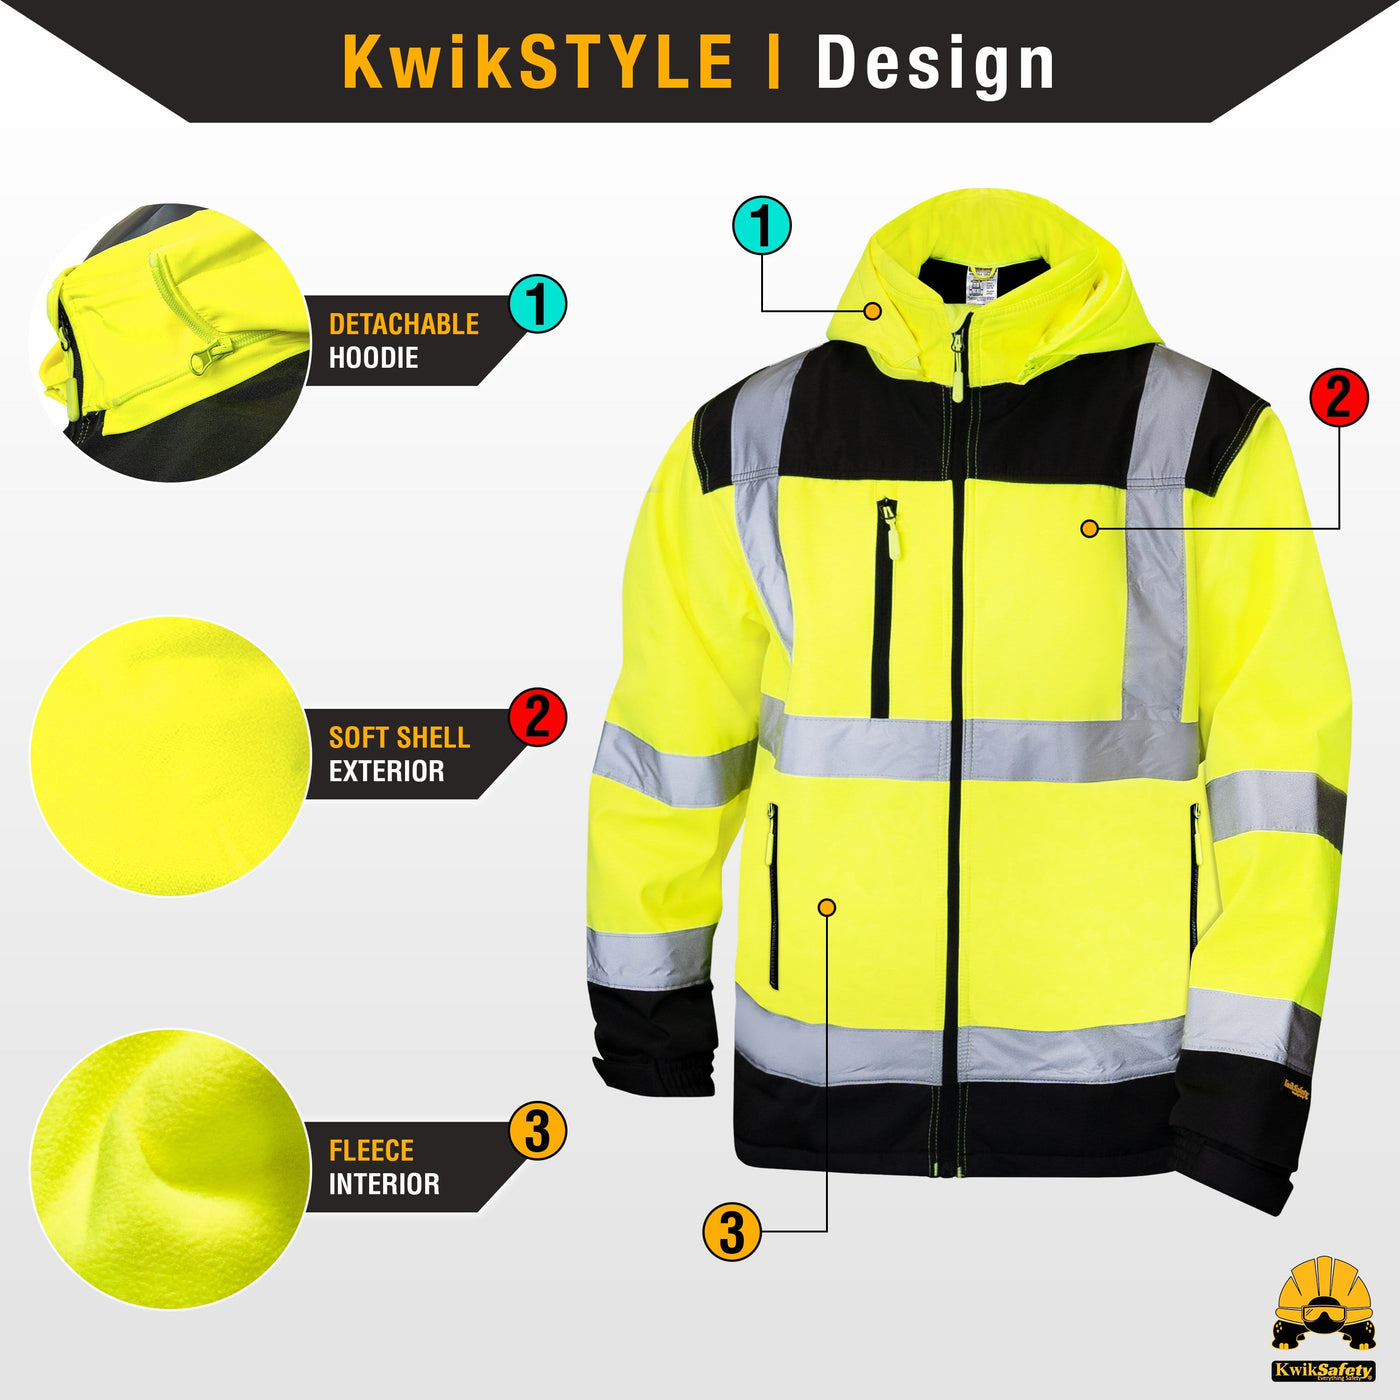 KwikSafety AGENT Safety Jacket (DETACHABLE HOOD) Class 3 ANSI Tested ...